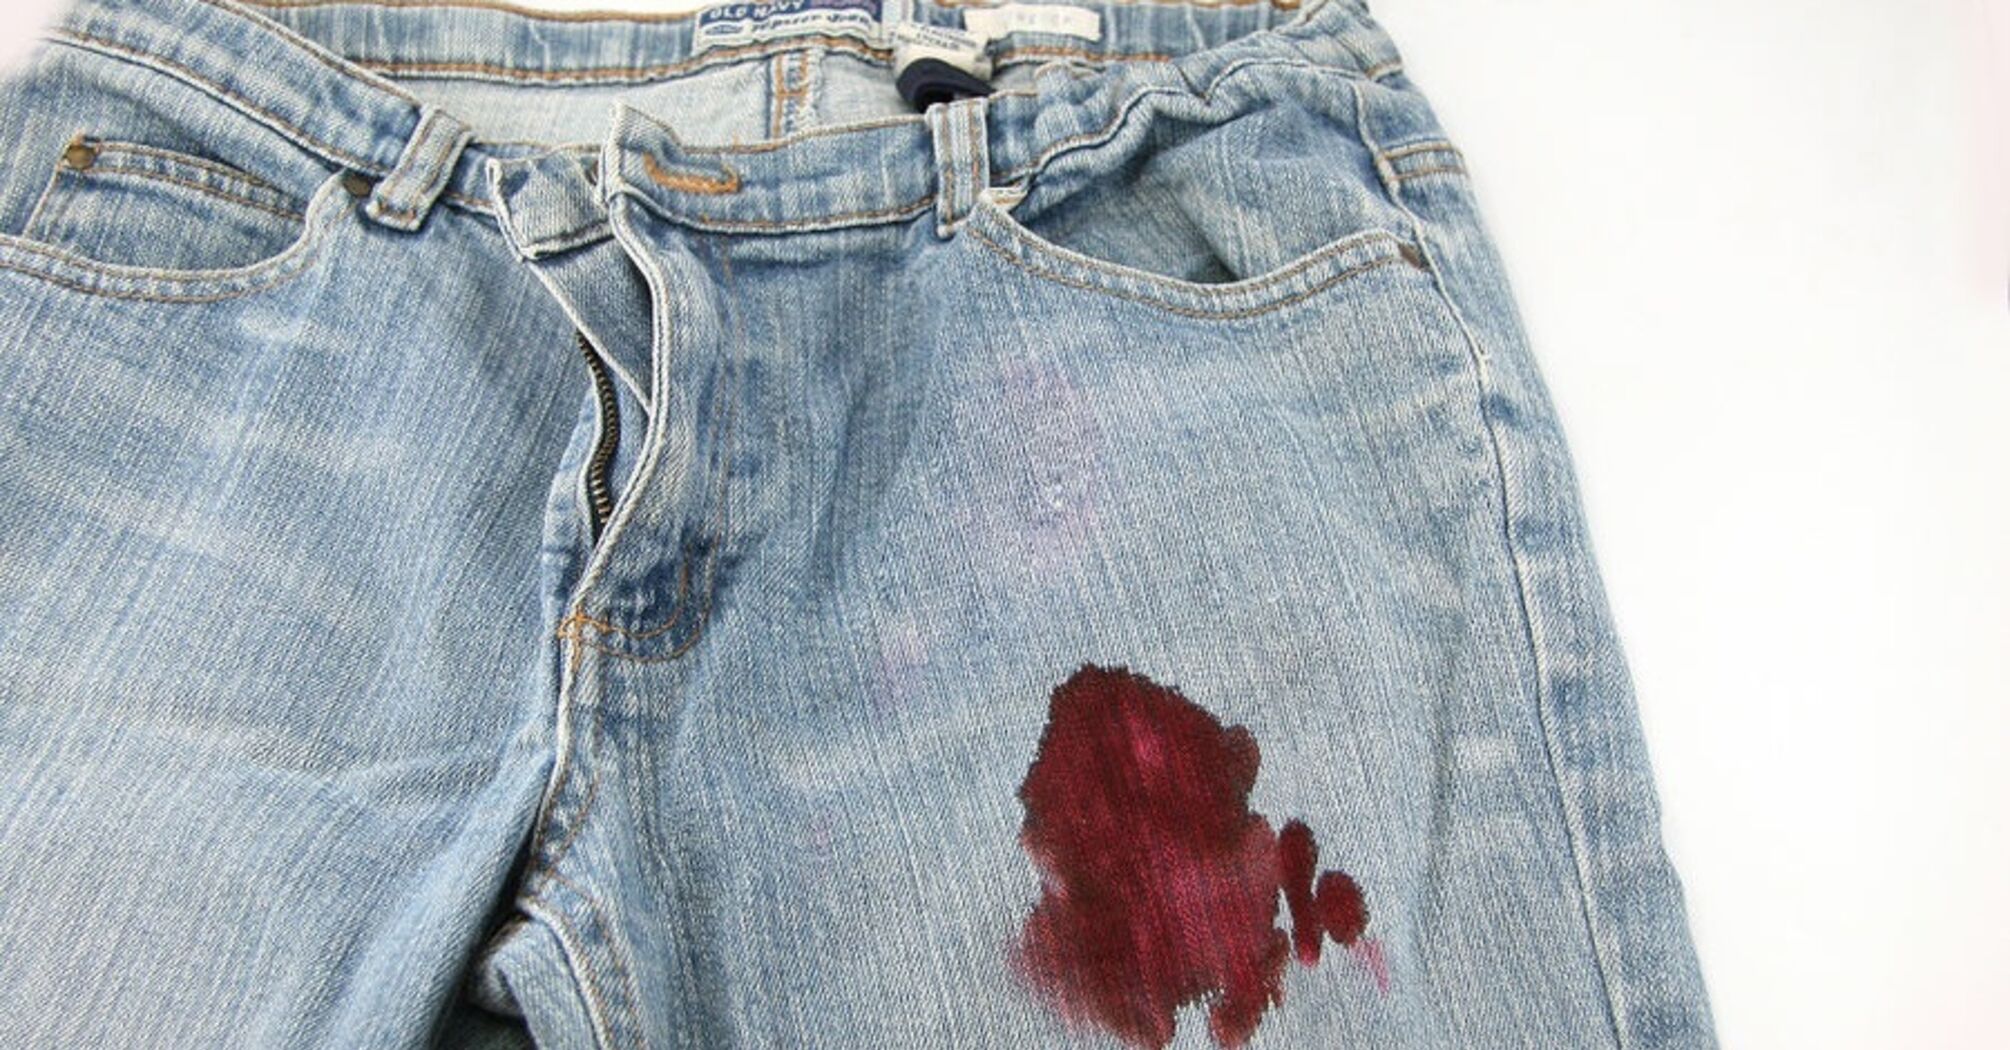 How to Get Bloodstains Out of Jeans